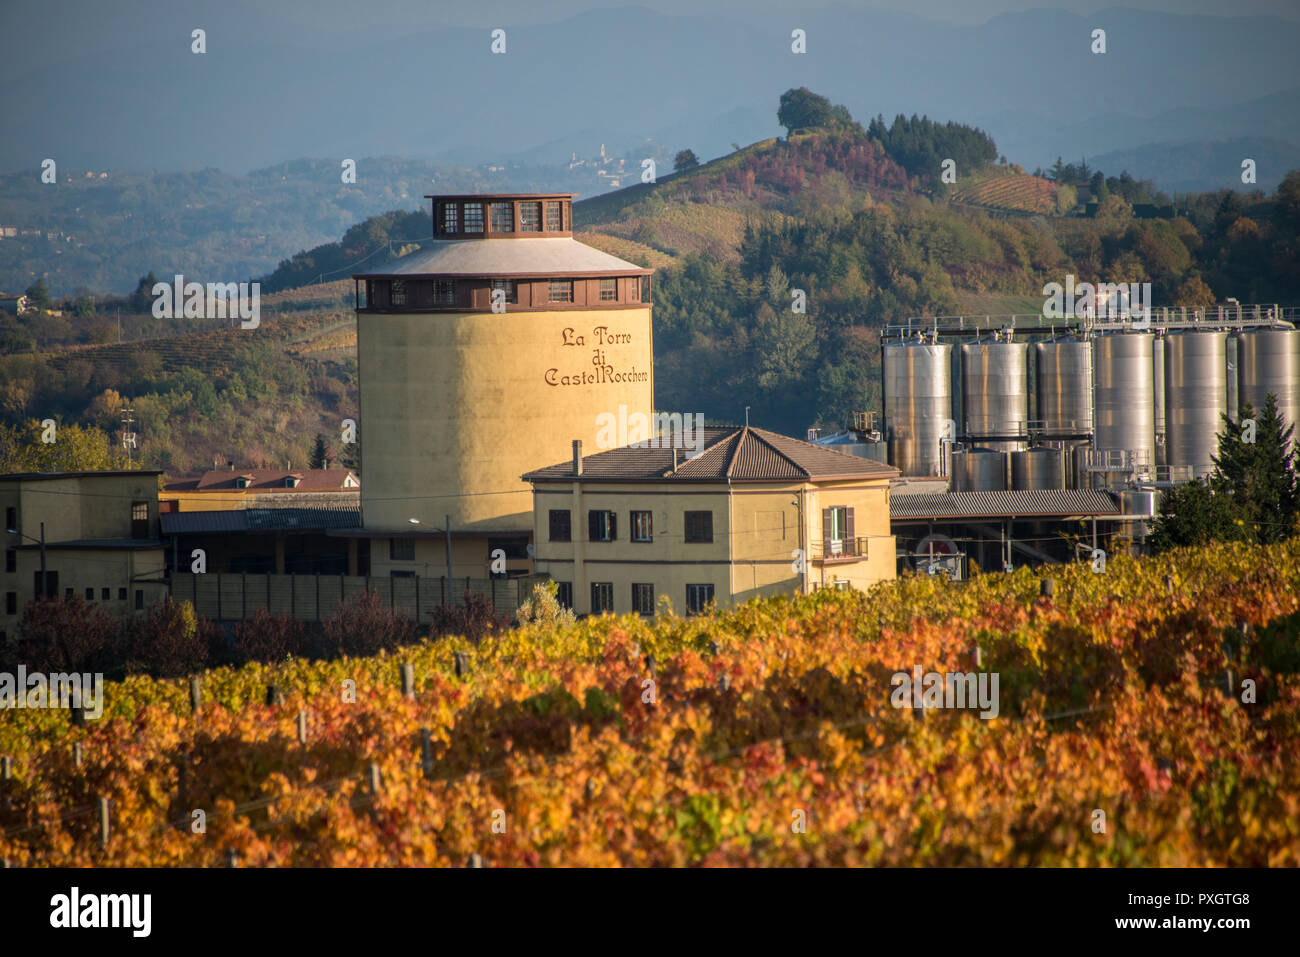 The vinery tower at the La Torre di Castel Rocchero just outside the town of Monferrato in Piedmont, Italy Stock Photo